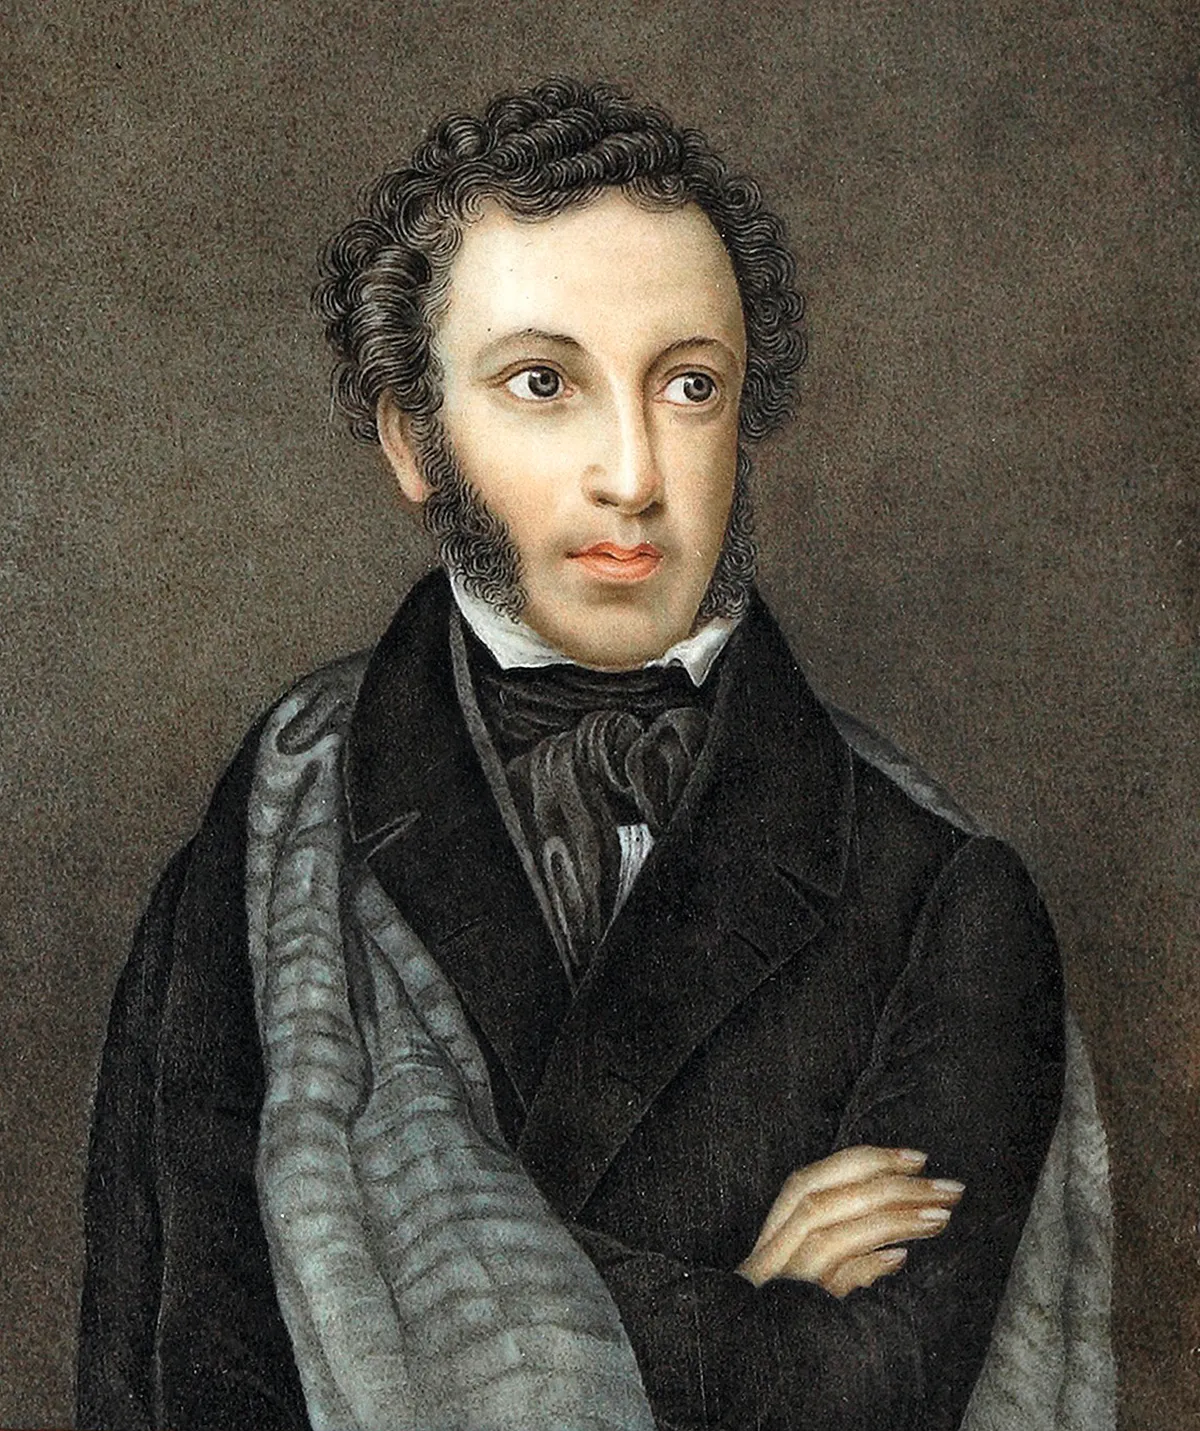 A painting of Alexander Pushkin wearing black with his arms crossed